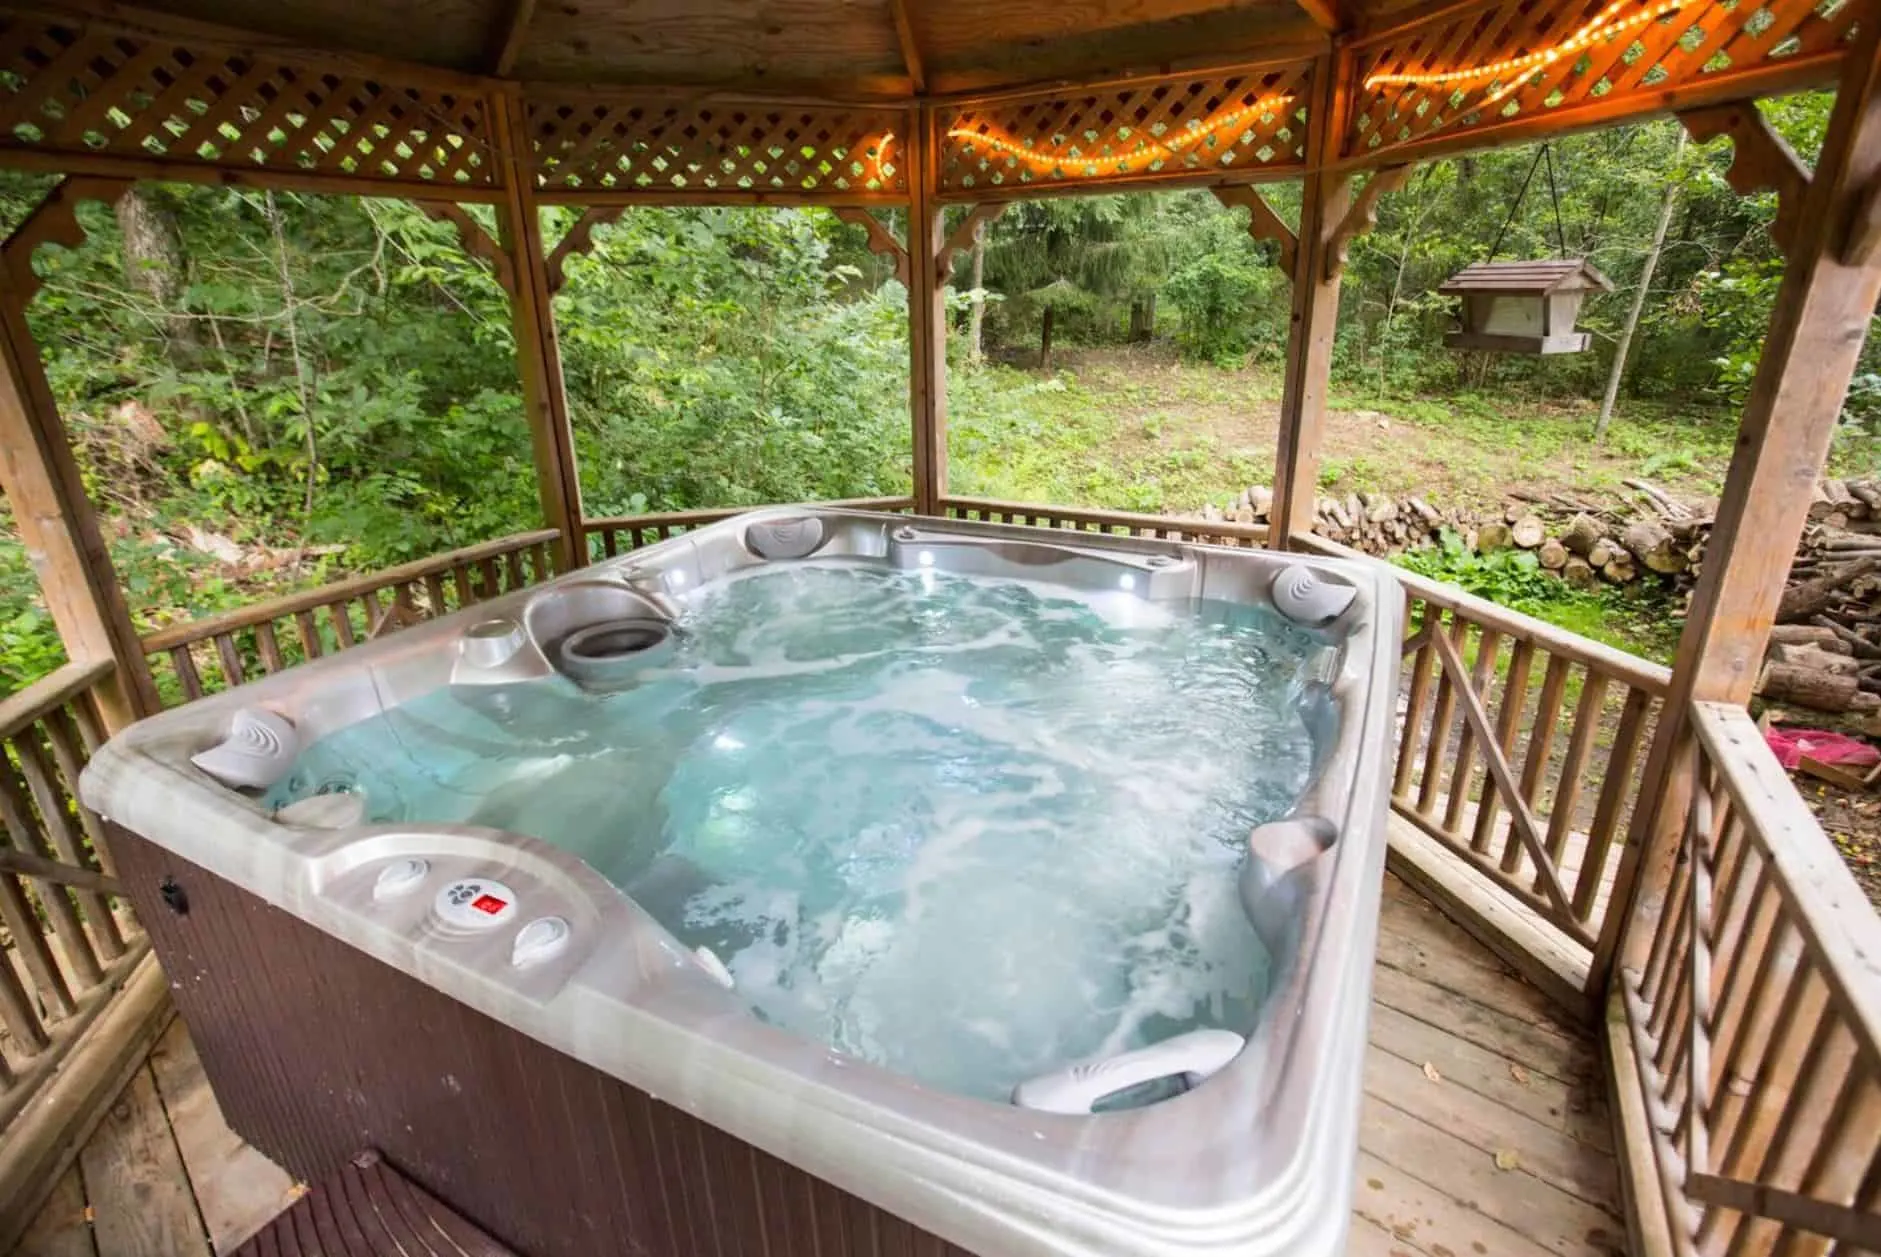 Wisconsin Dells Cabins with Hot Tubs, view with a hot tub on a porch